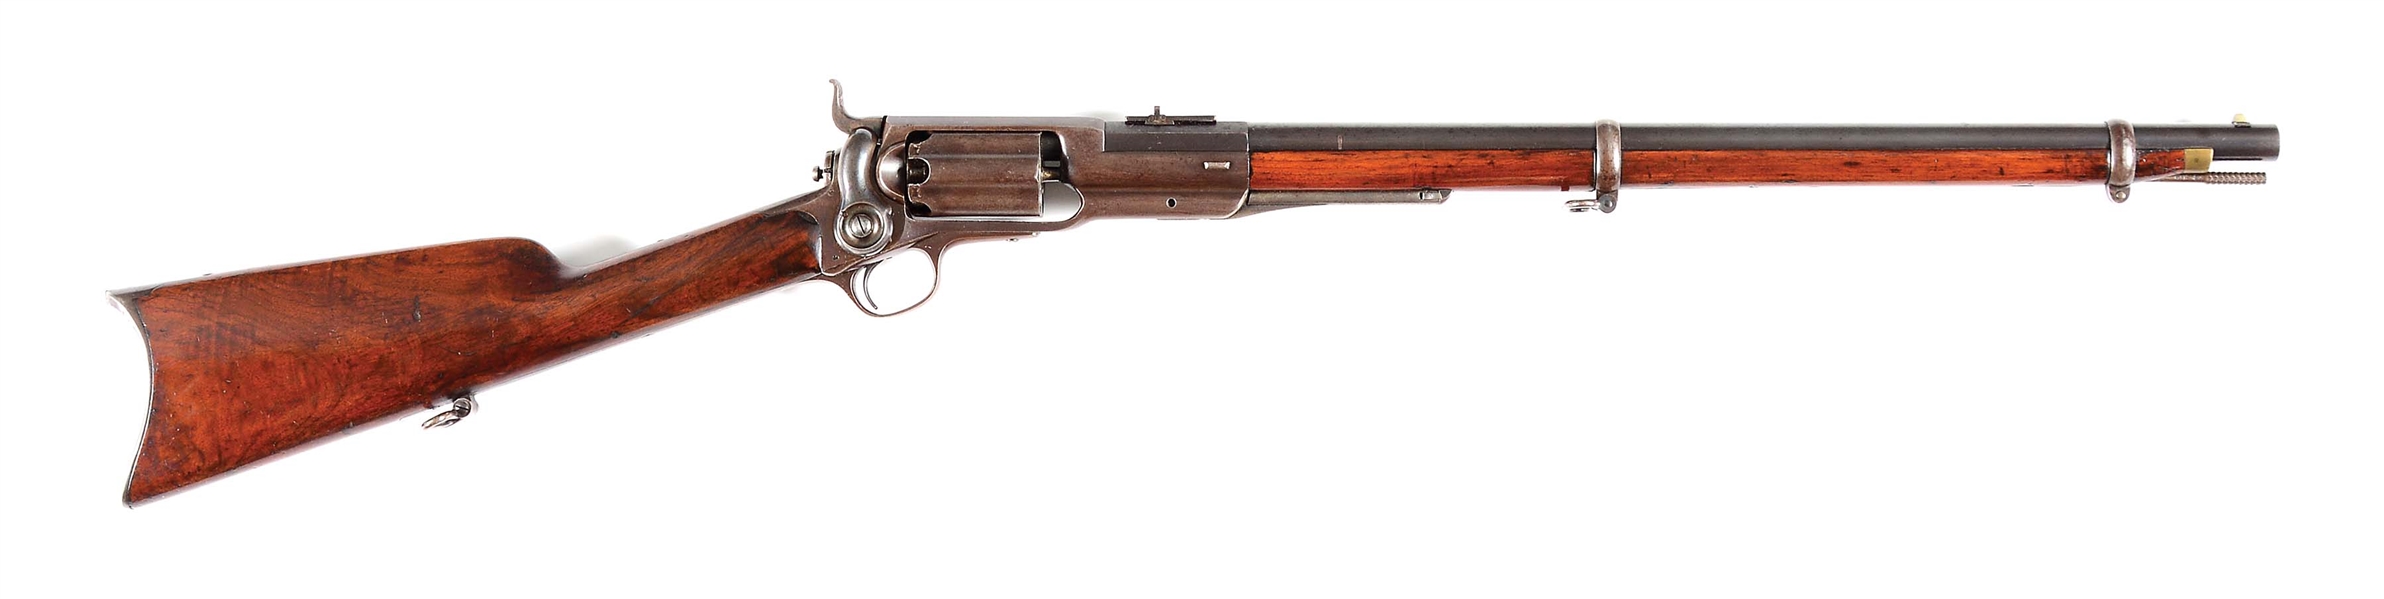 (A) COLT MODEL 1855 FULL STOCK SPORTING PERCUSSION RIFLE.